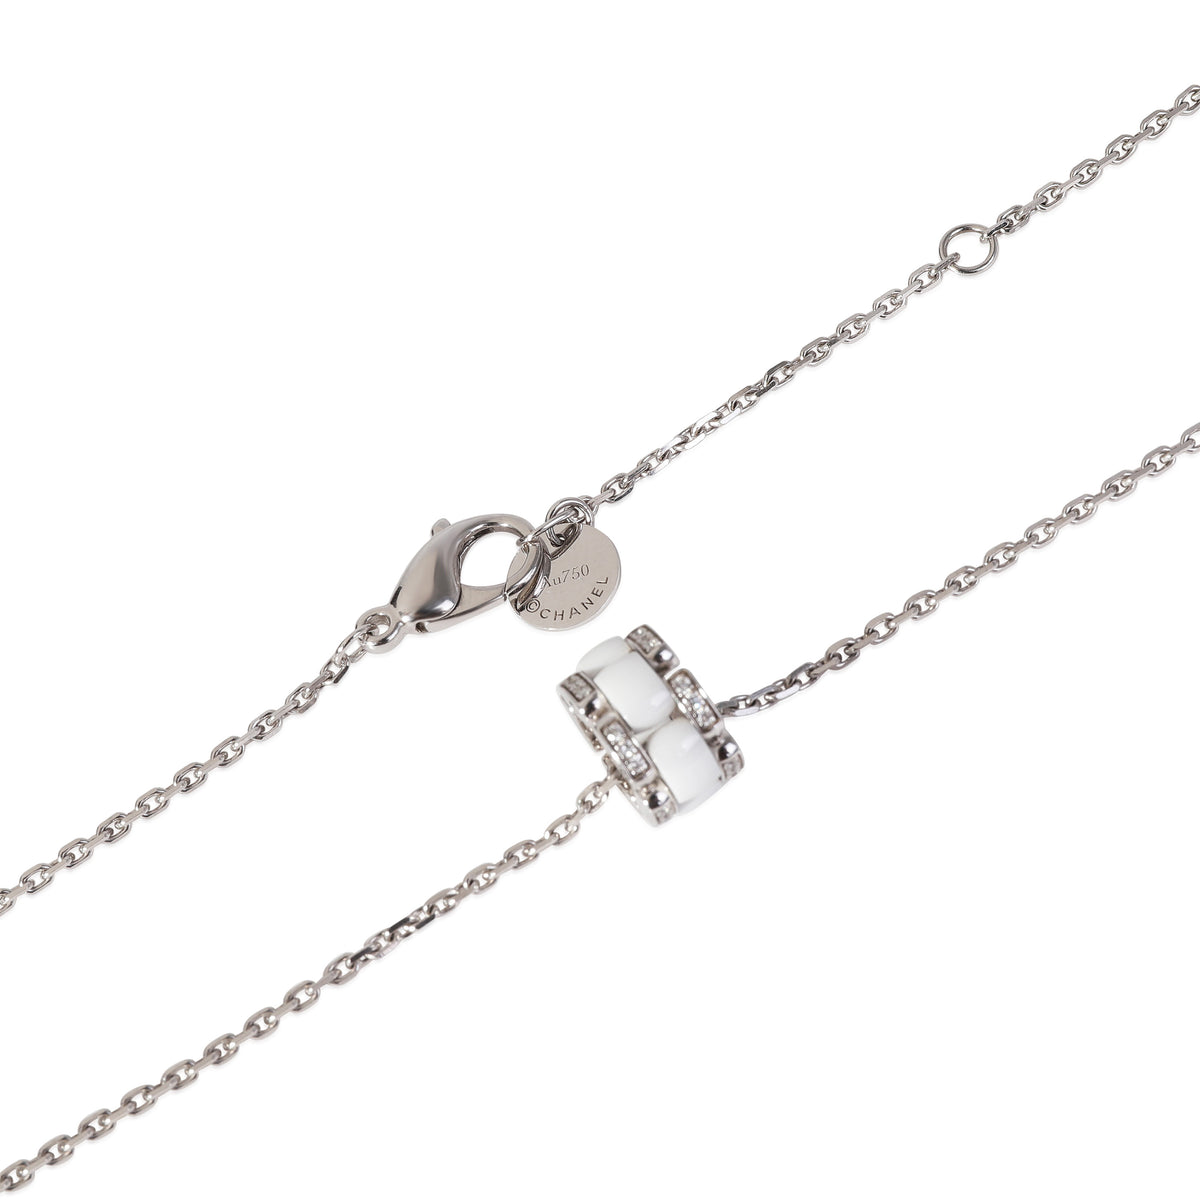 Chanel Ultra White Ceramic Necklace With Diamonds in 18K White Gold 0.15 ctw